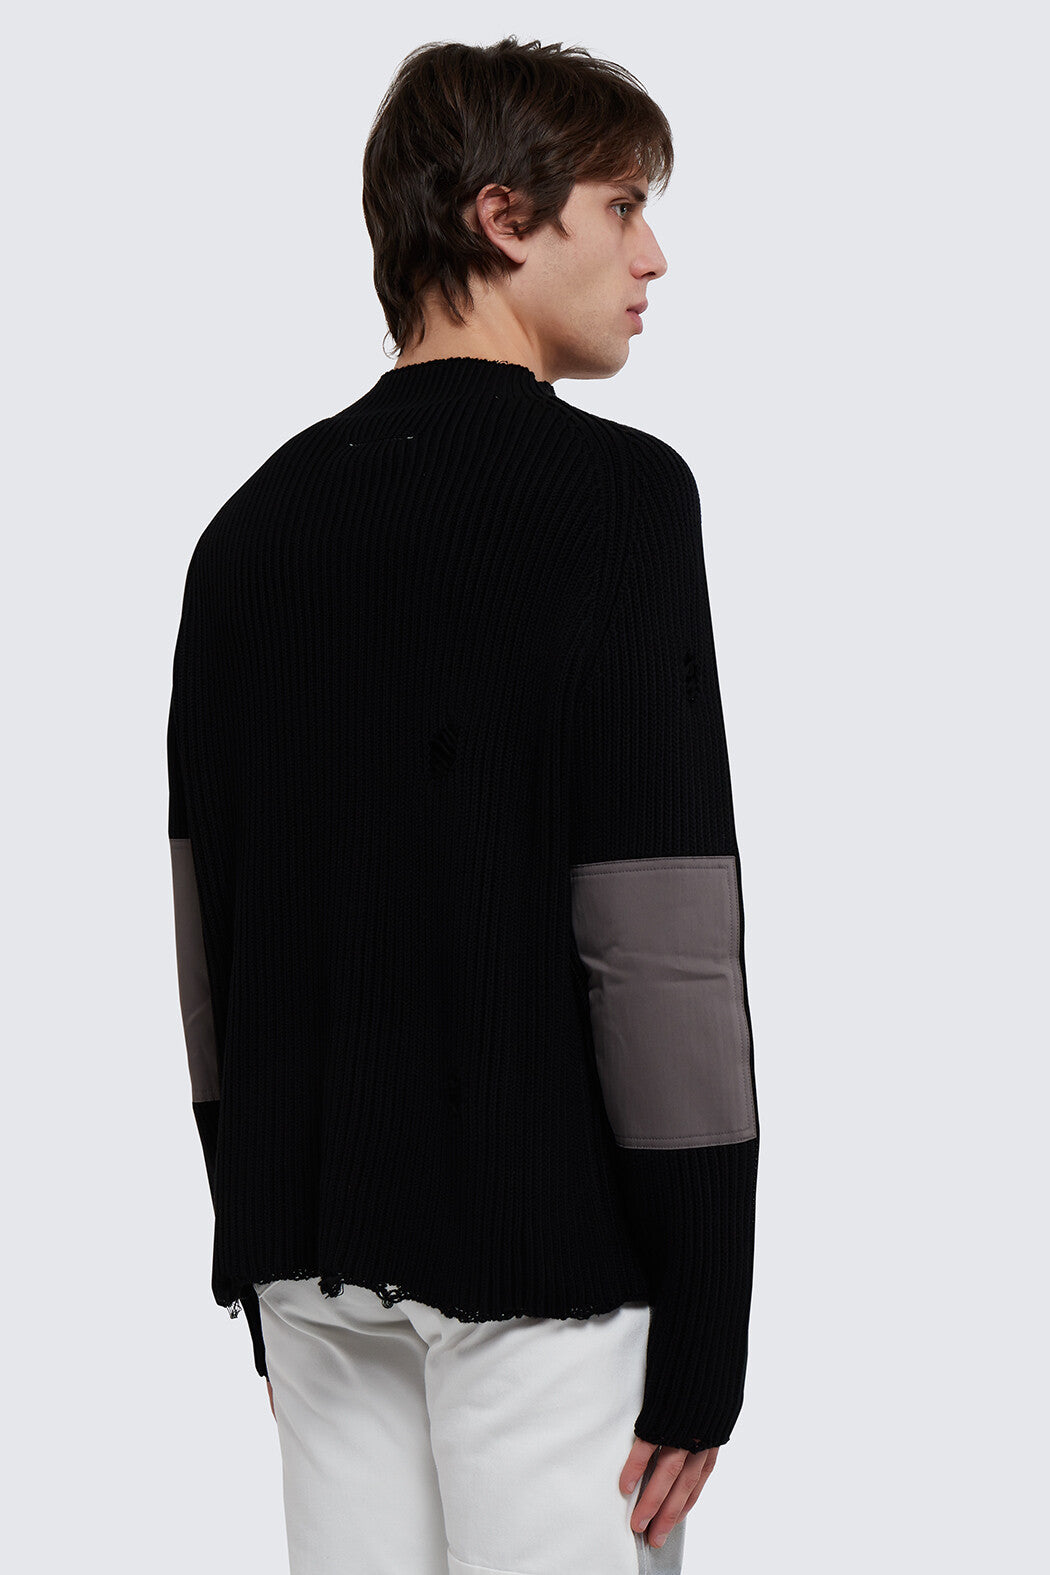 Distroyed Knit Sweater